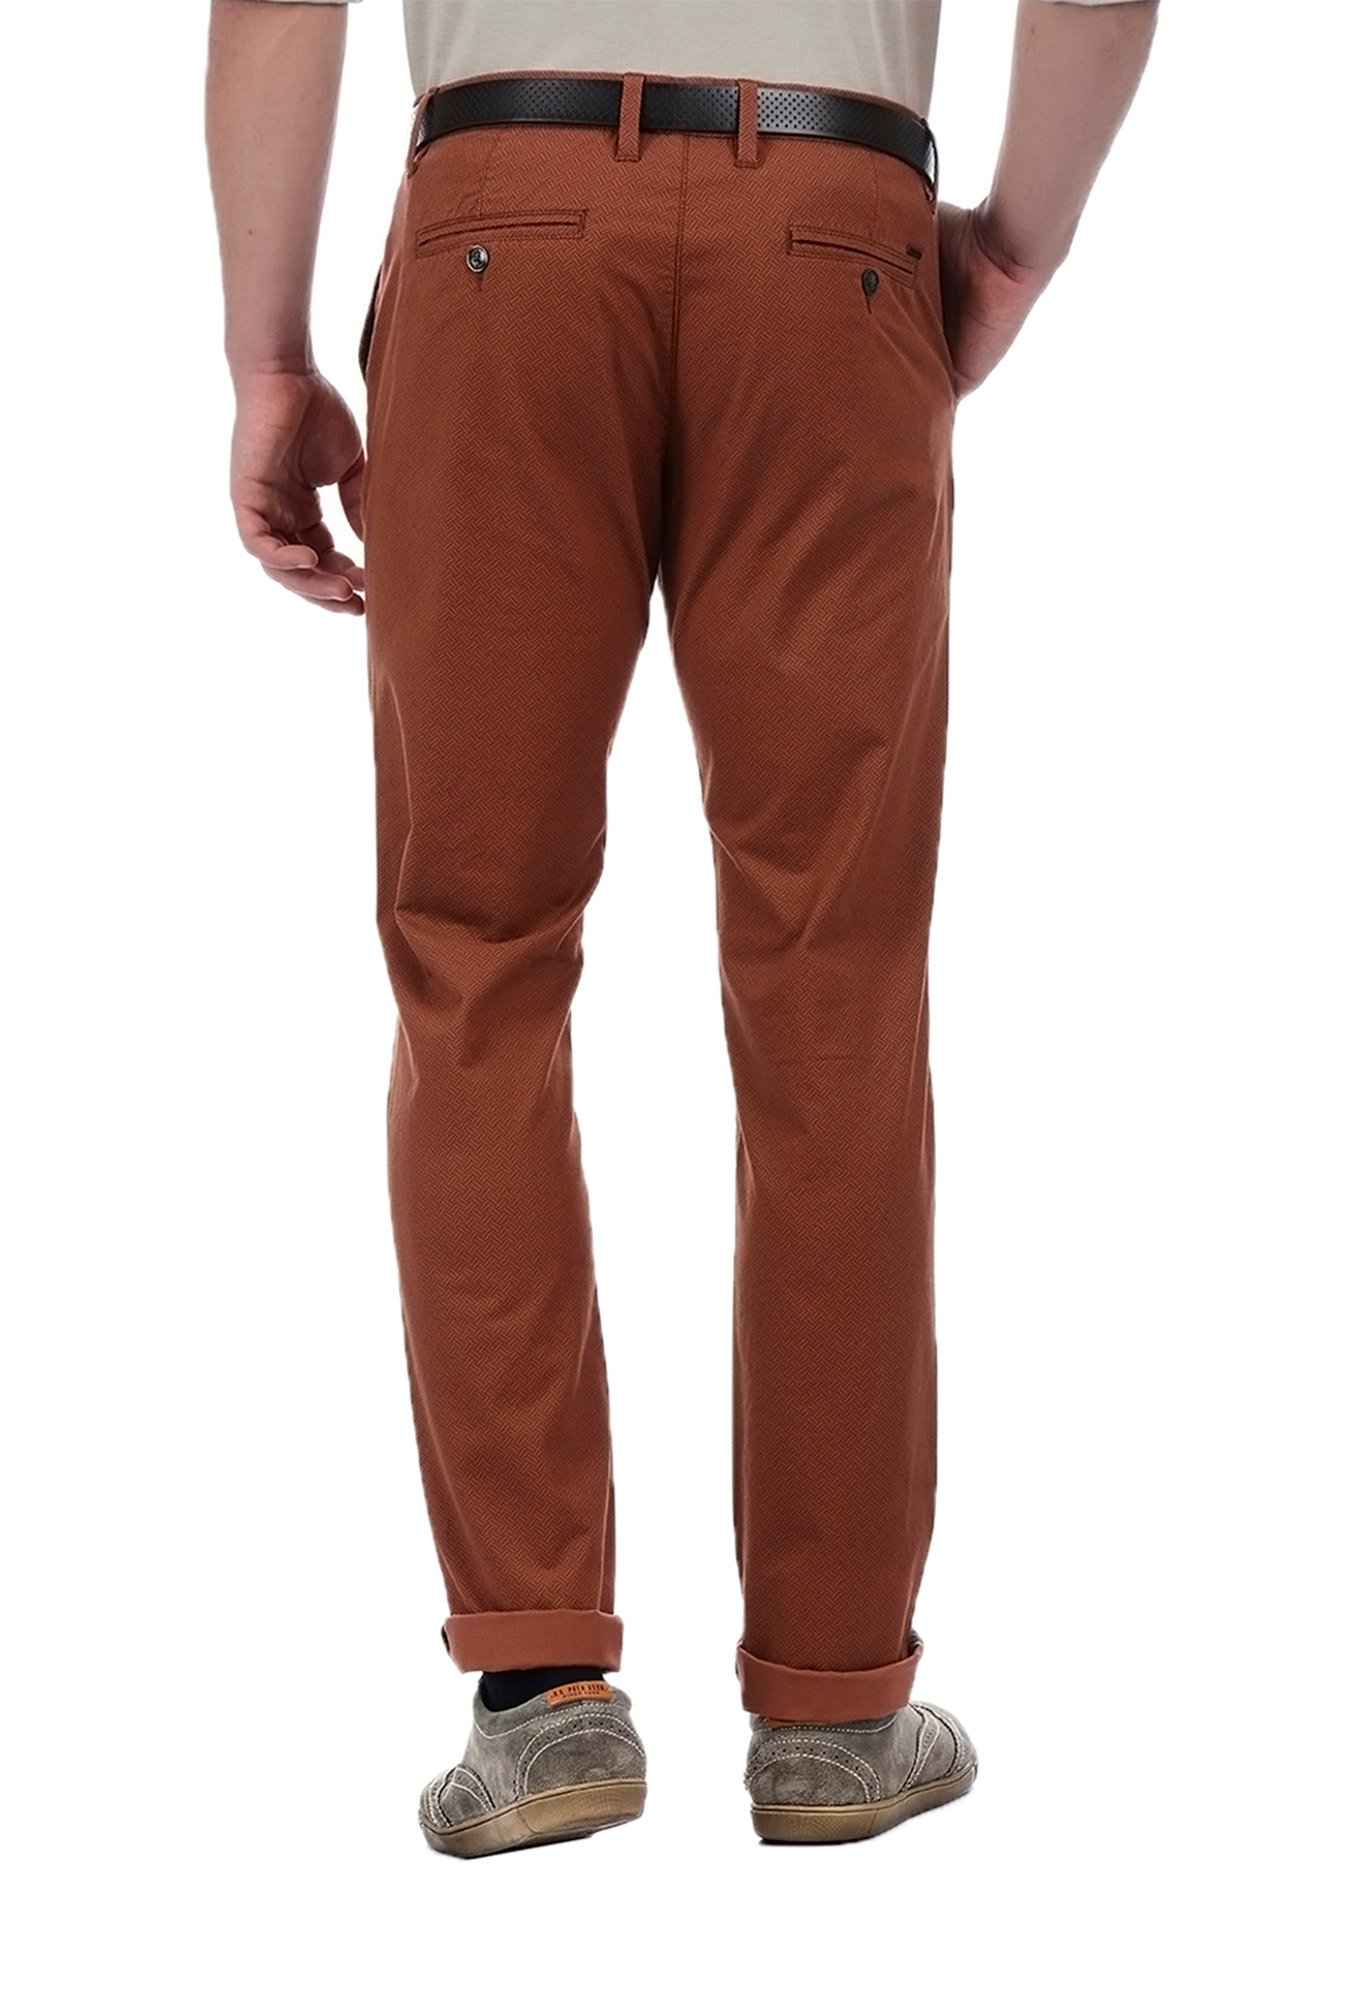 Buy Brown and Brick Red Combo of 2 Men Pants Cotton for Best Price,  Reviews, Free Shipping